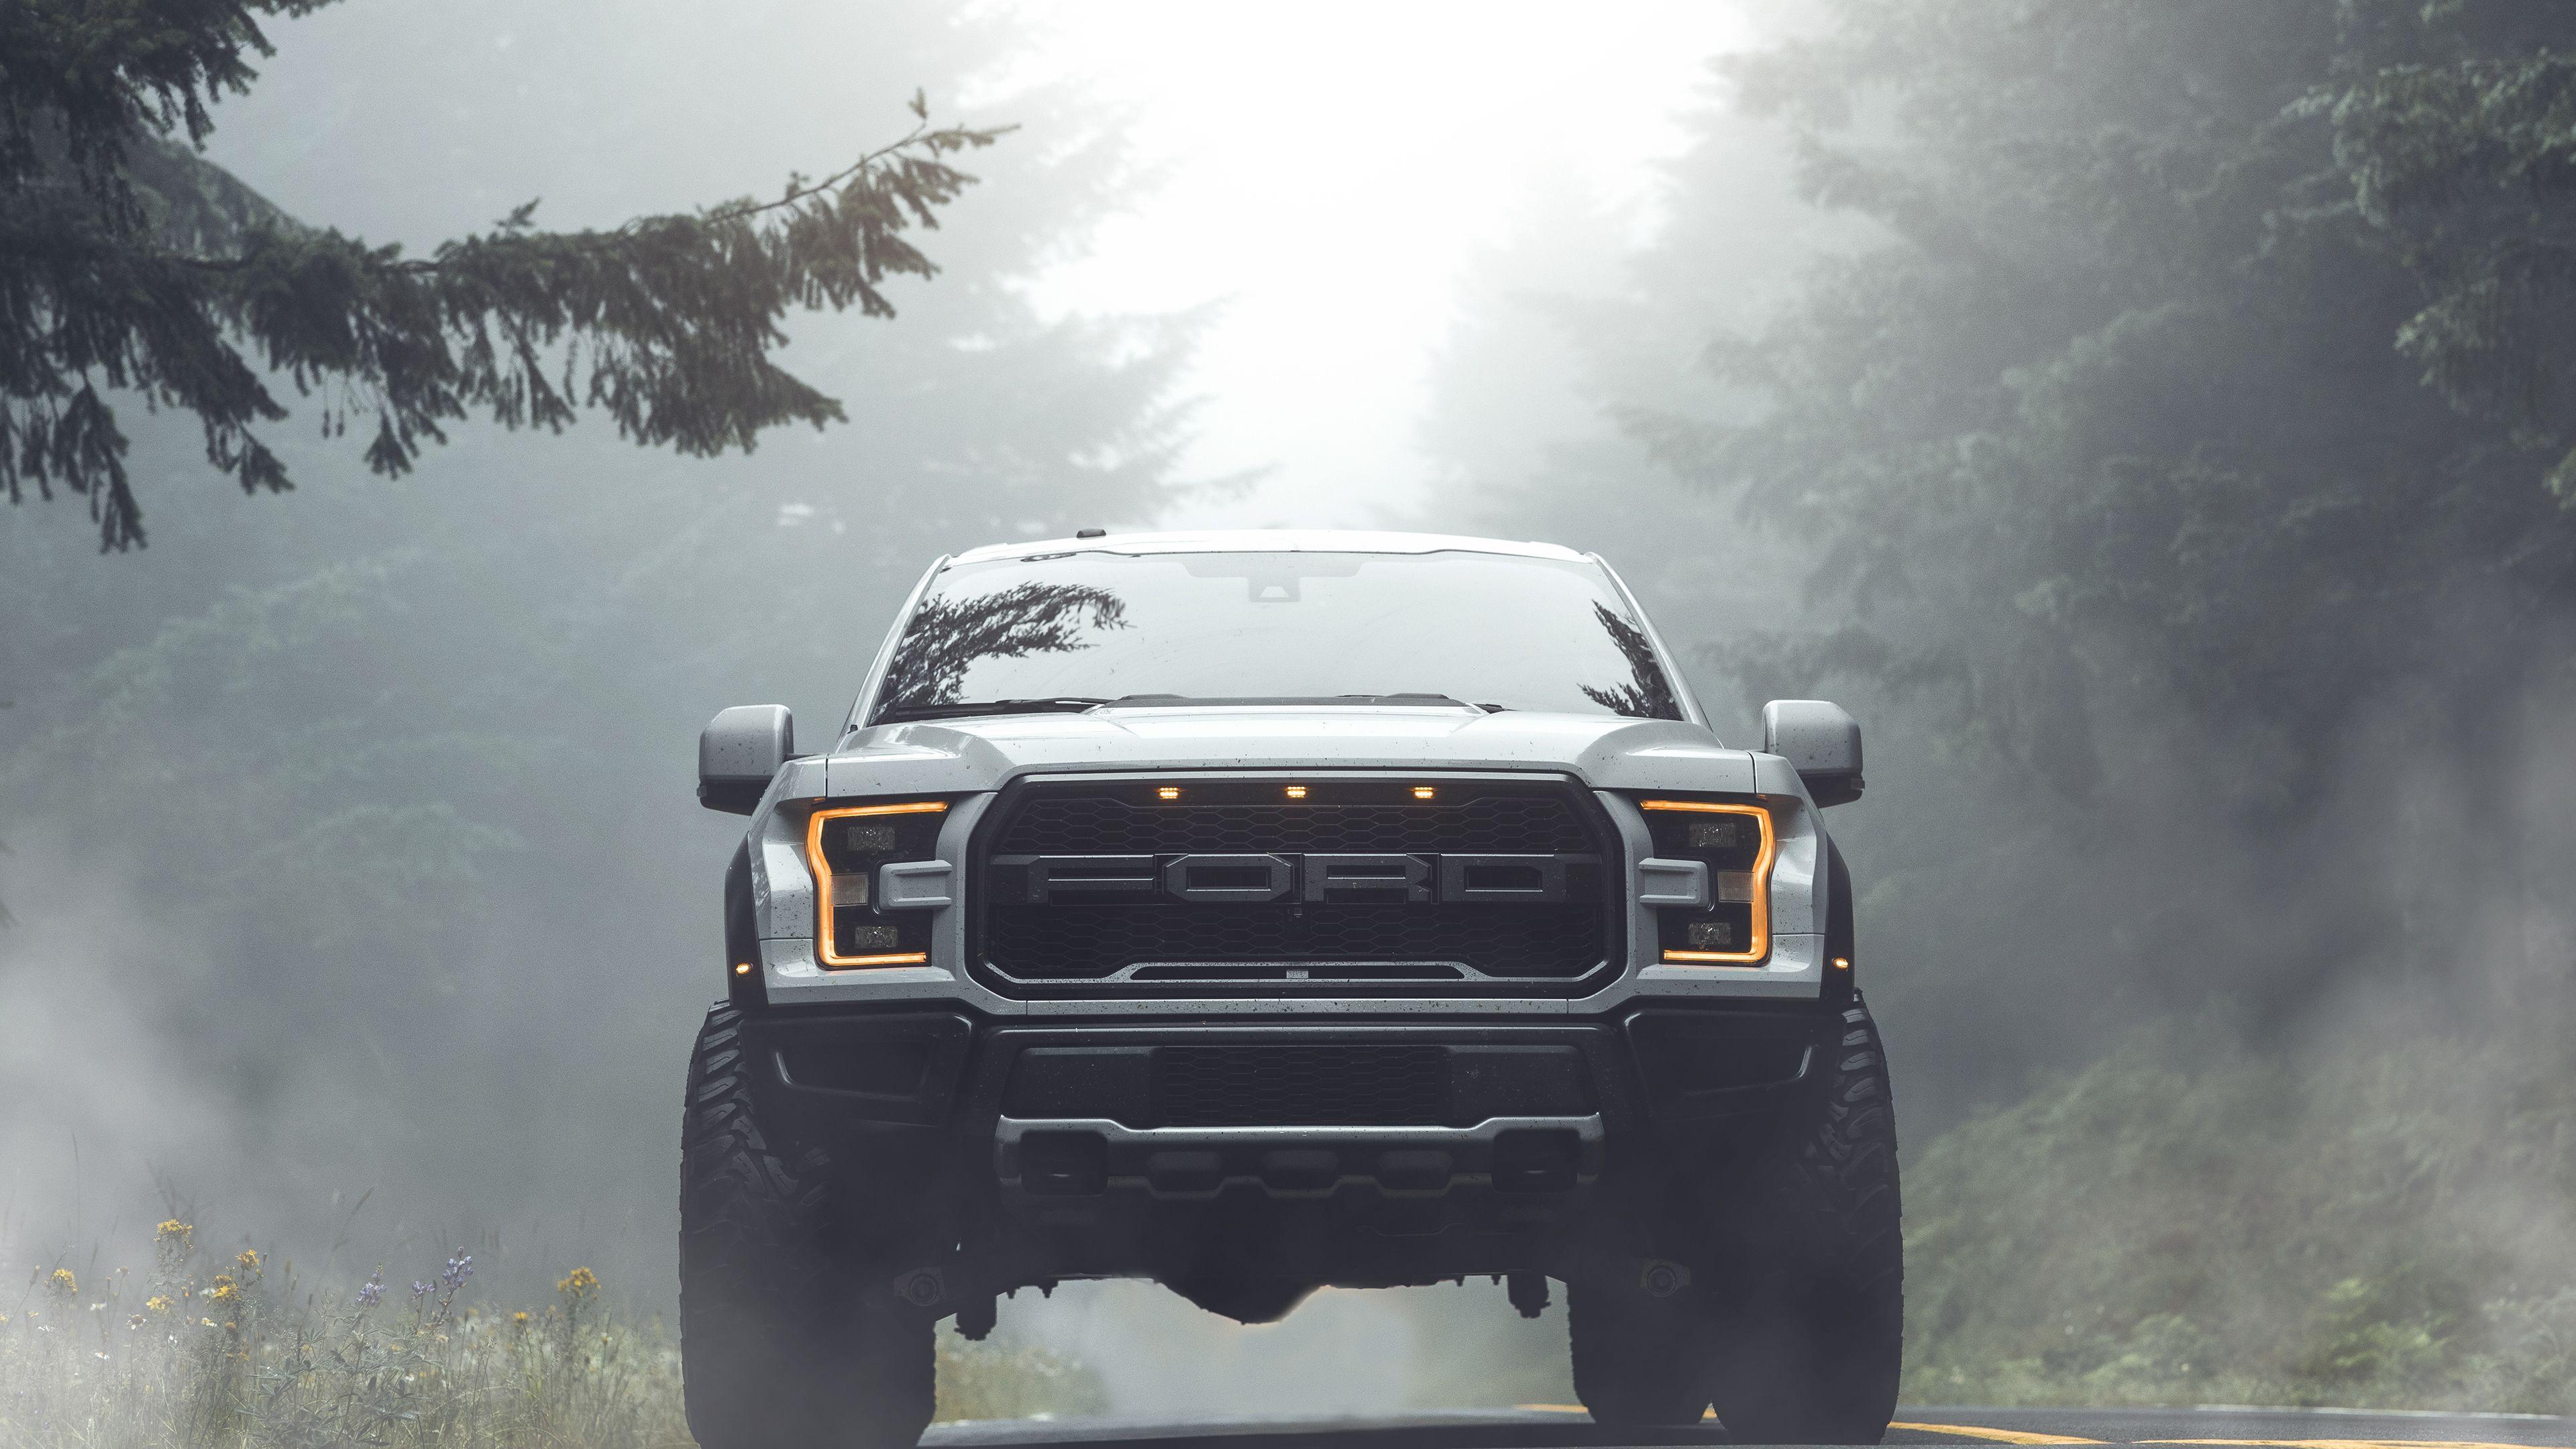 Black Ford Raptor Wallpapers Top Free Black Ford Raptor Backgrounds Wallpaperaccess